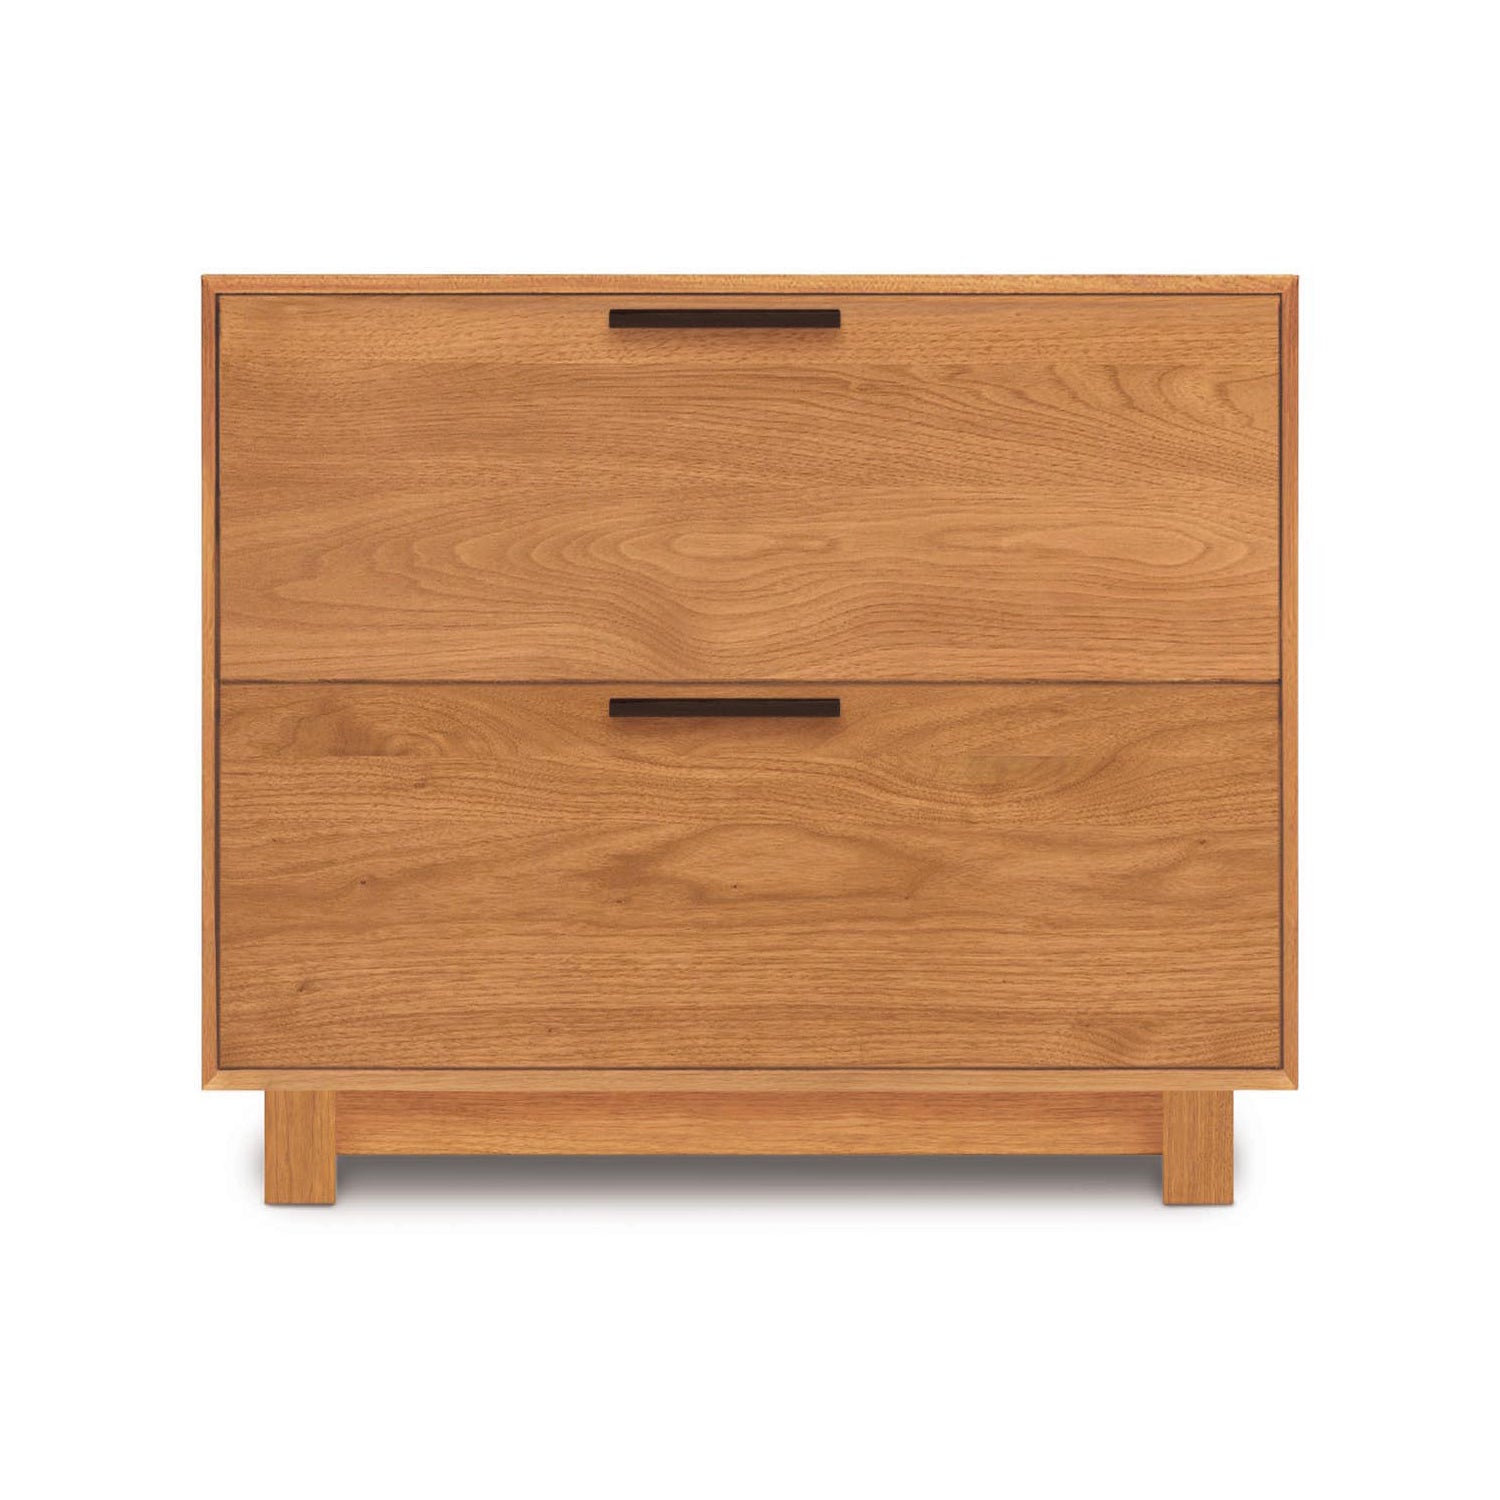 A Copeland Furniture Linear Lateral File Cabinet in a sustainable hardwood design on a white background.